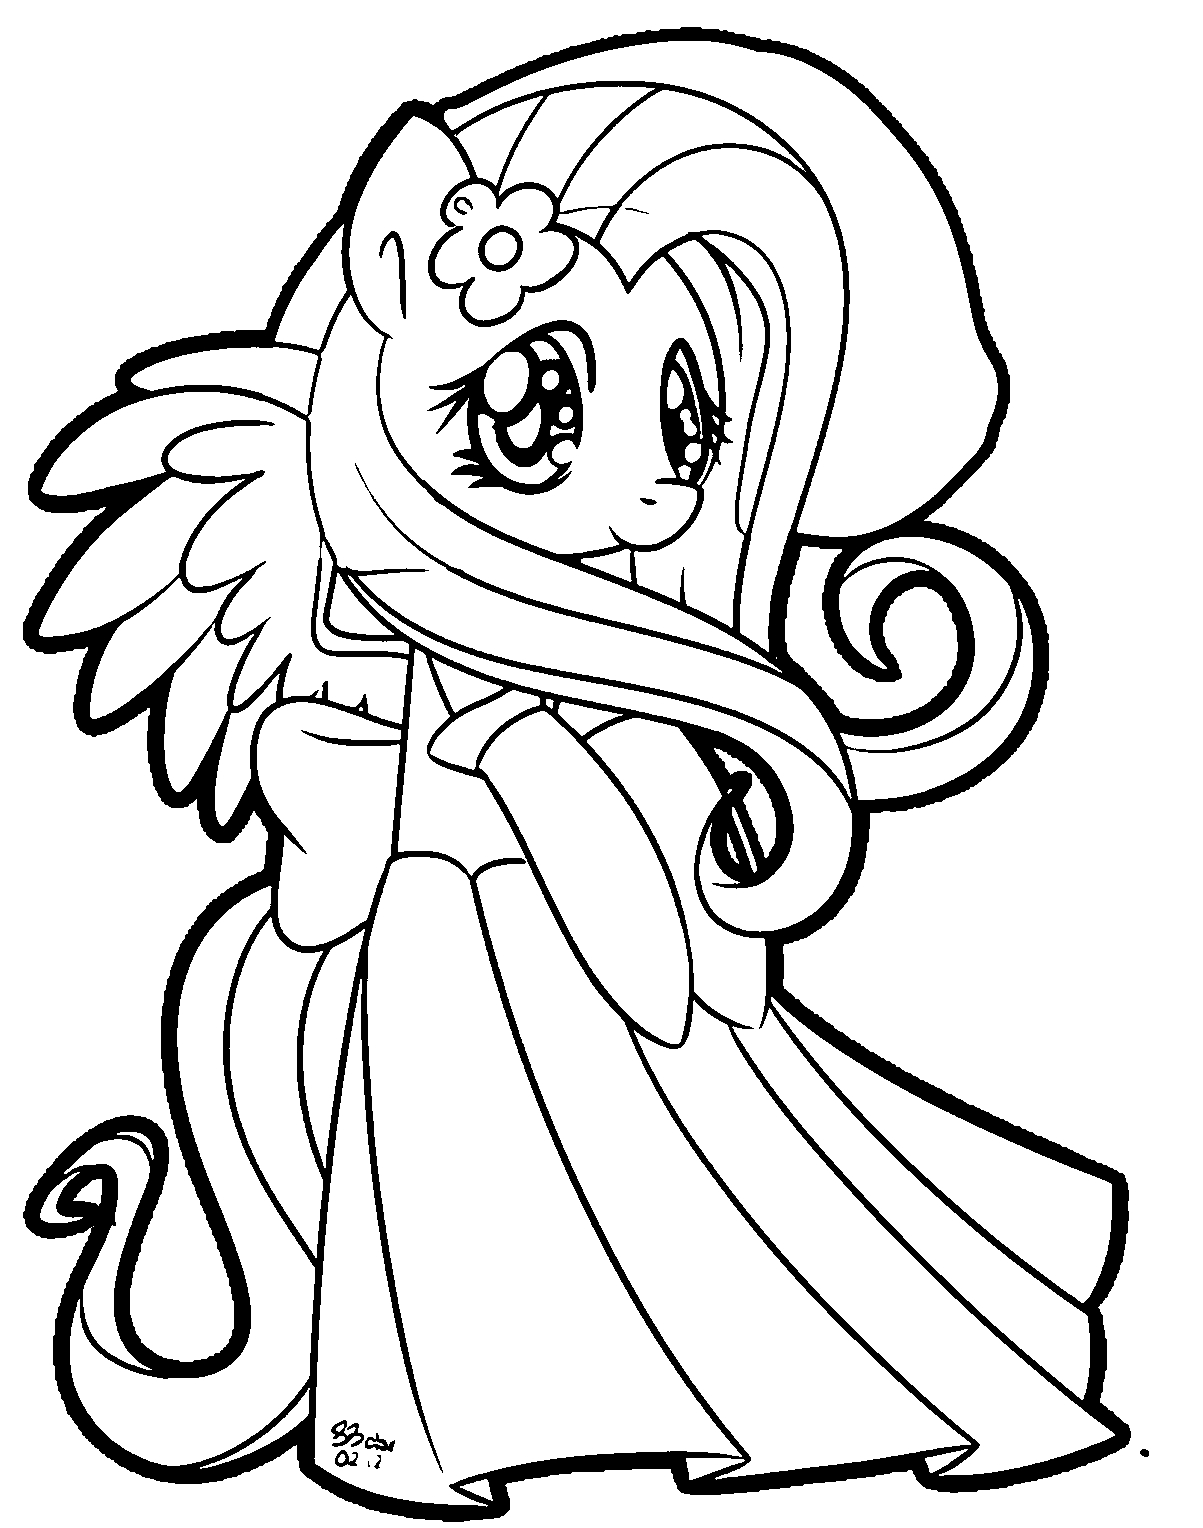 Barnabas Coloring Page 20 Awesome My Little Pony Princess Celestia Printable Coloring Pages